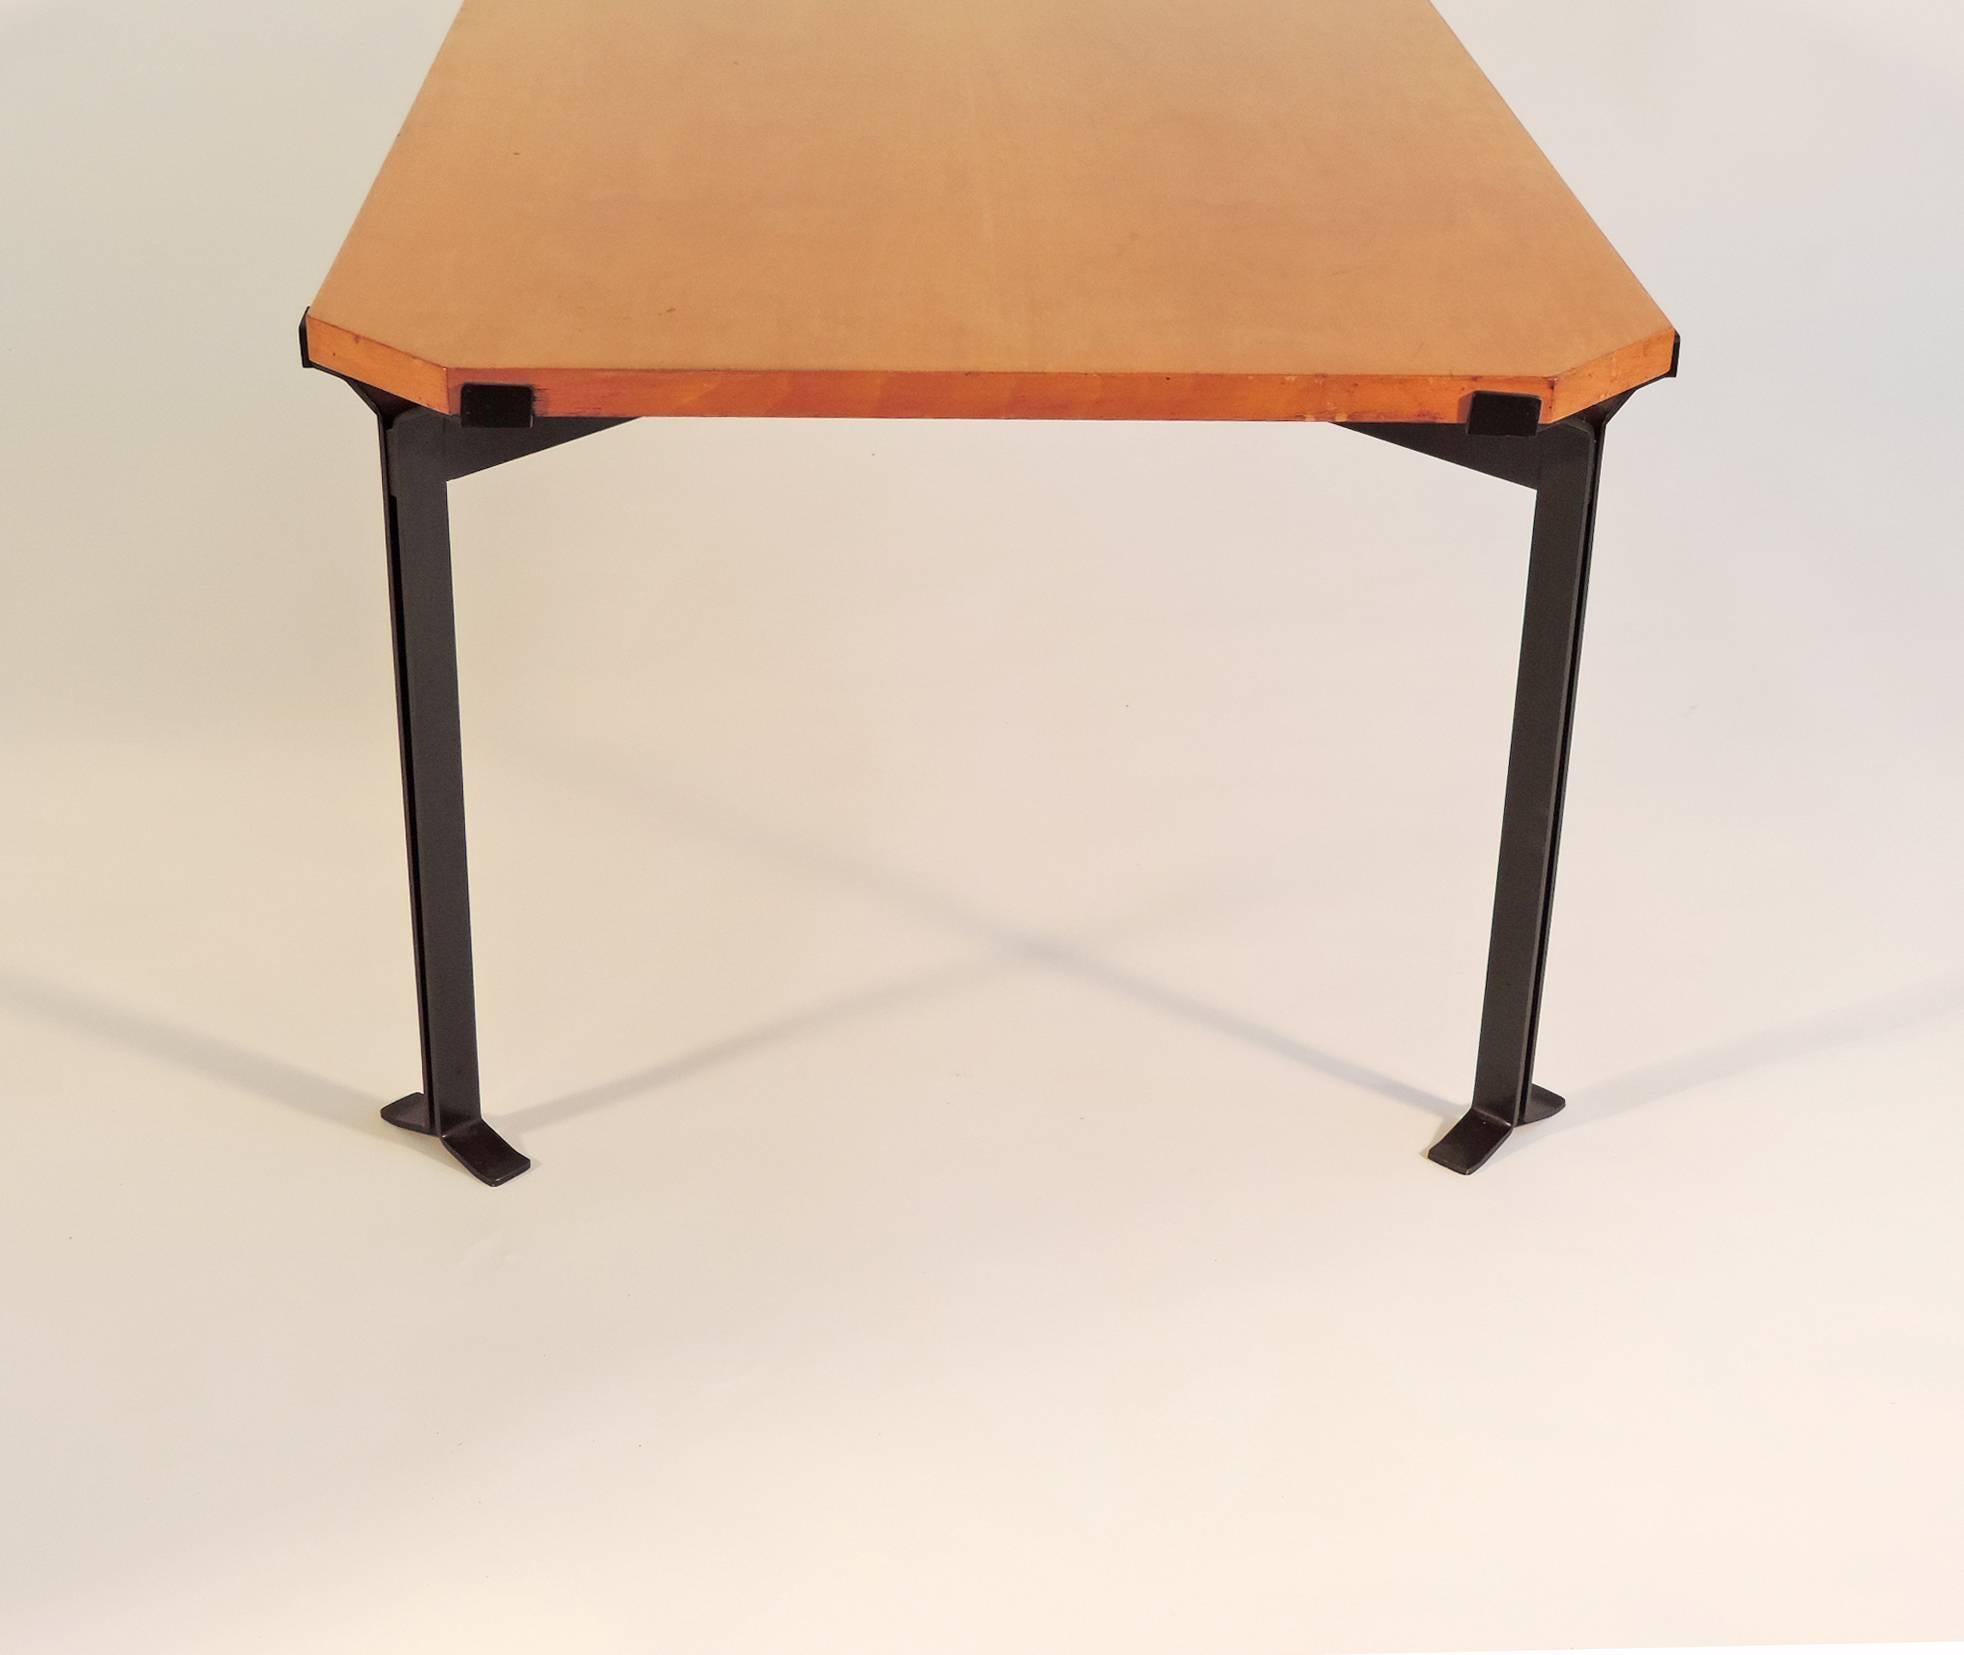 Architectural Low Table by Studio BBPR In Excellent Condition For Sale In Milan, IT